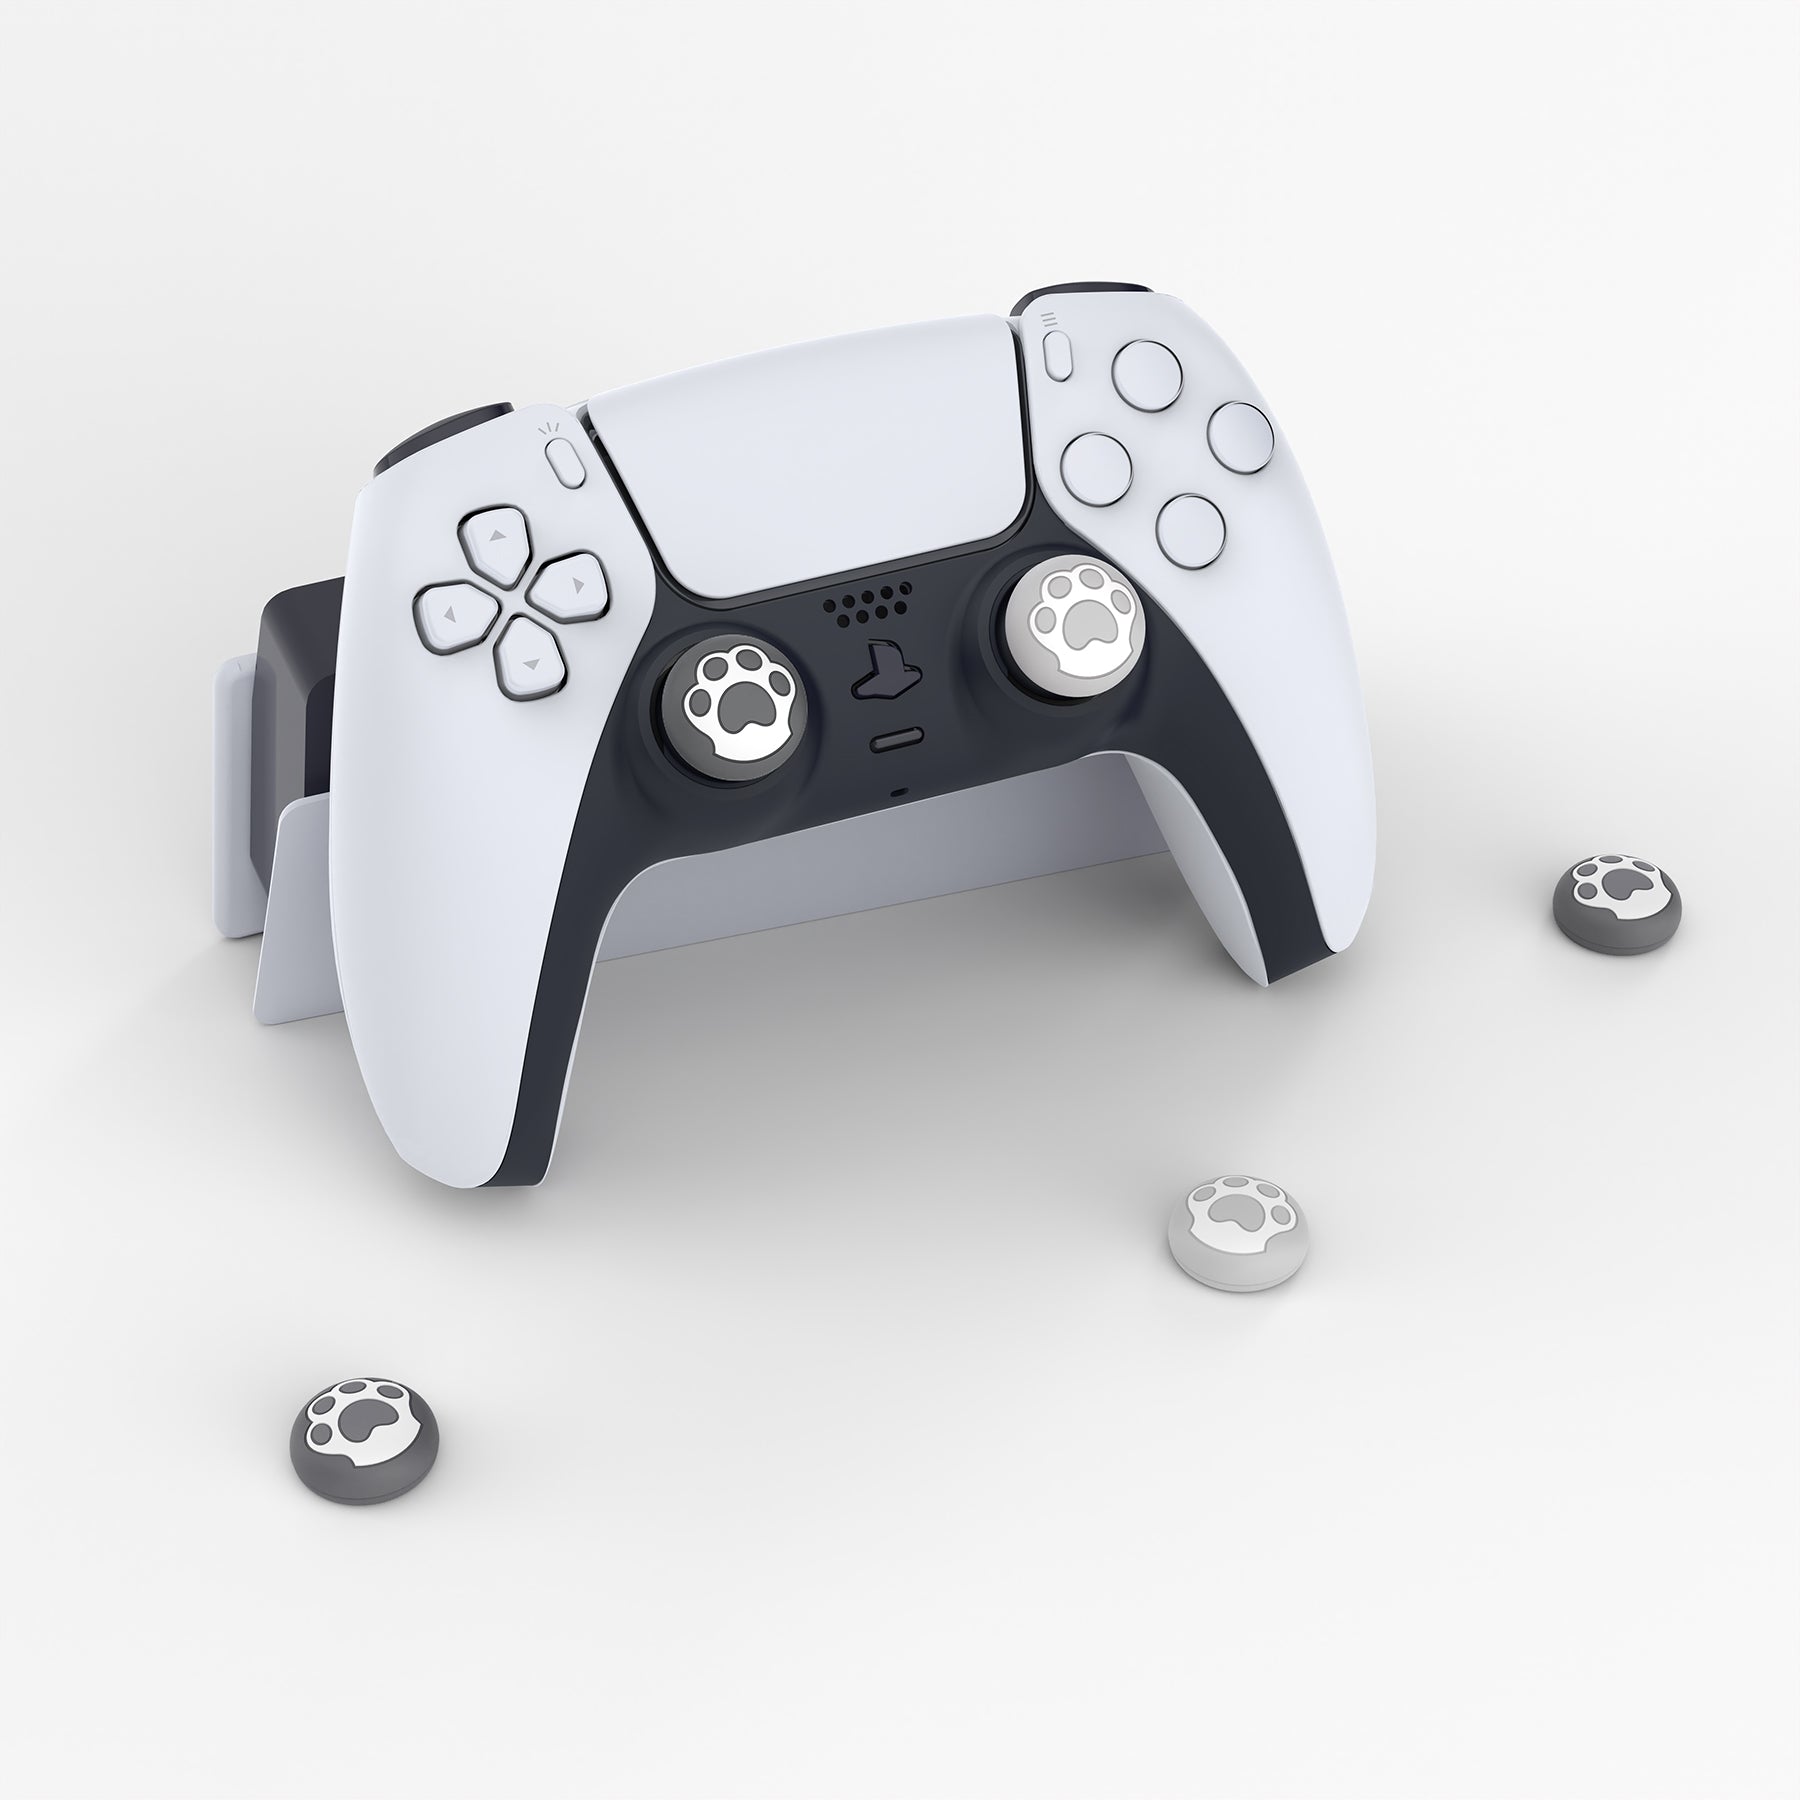 PlayVital Cat Paw Cute Thumb Grip Caps for ps5/4 Controller, Silicone Analog Stick Caps Cover for Xbox Series X/S, Thumbstick Caps for Switch Pro Controller - Gray & Light Gray - PJM3006 PlayVital